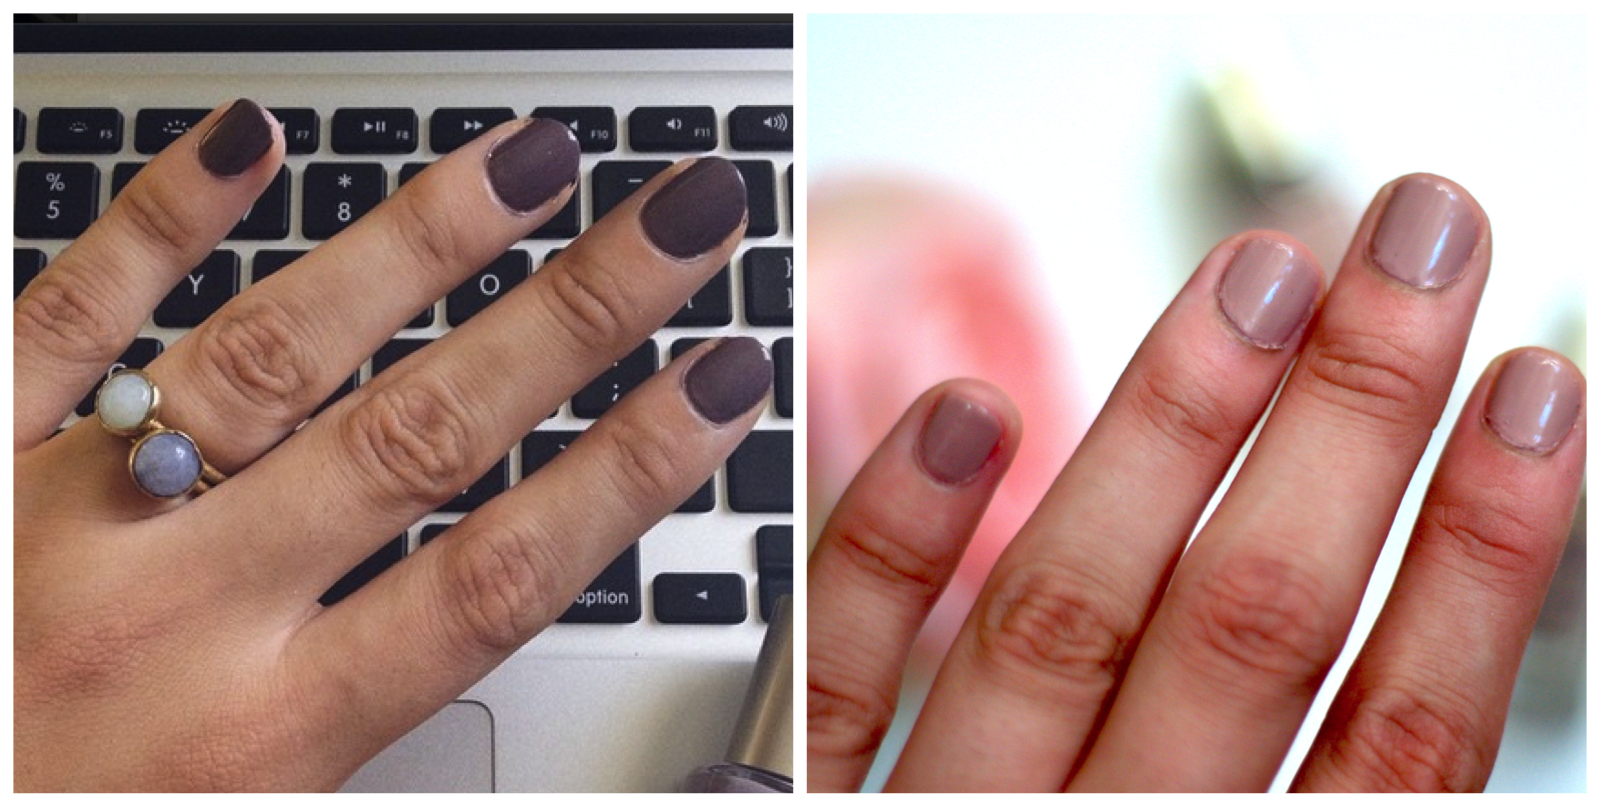 9. Muted Nail Color Images for Commercial Use - wide 8